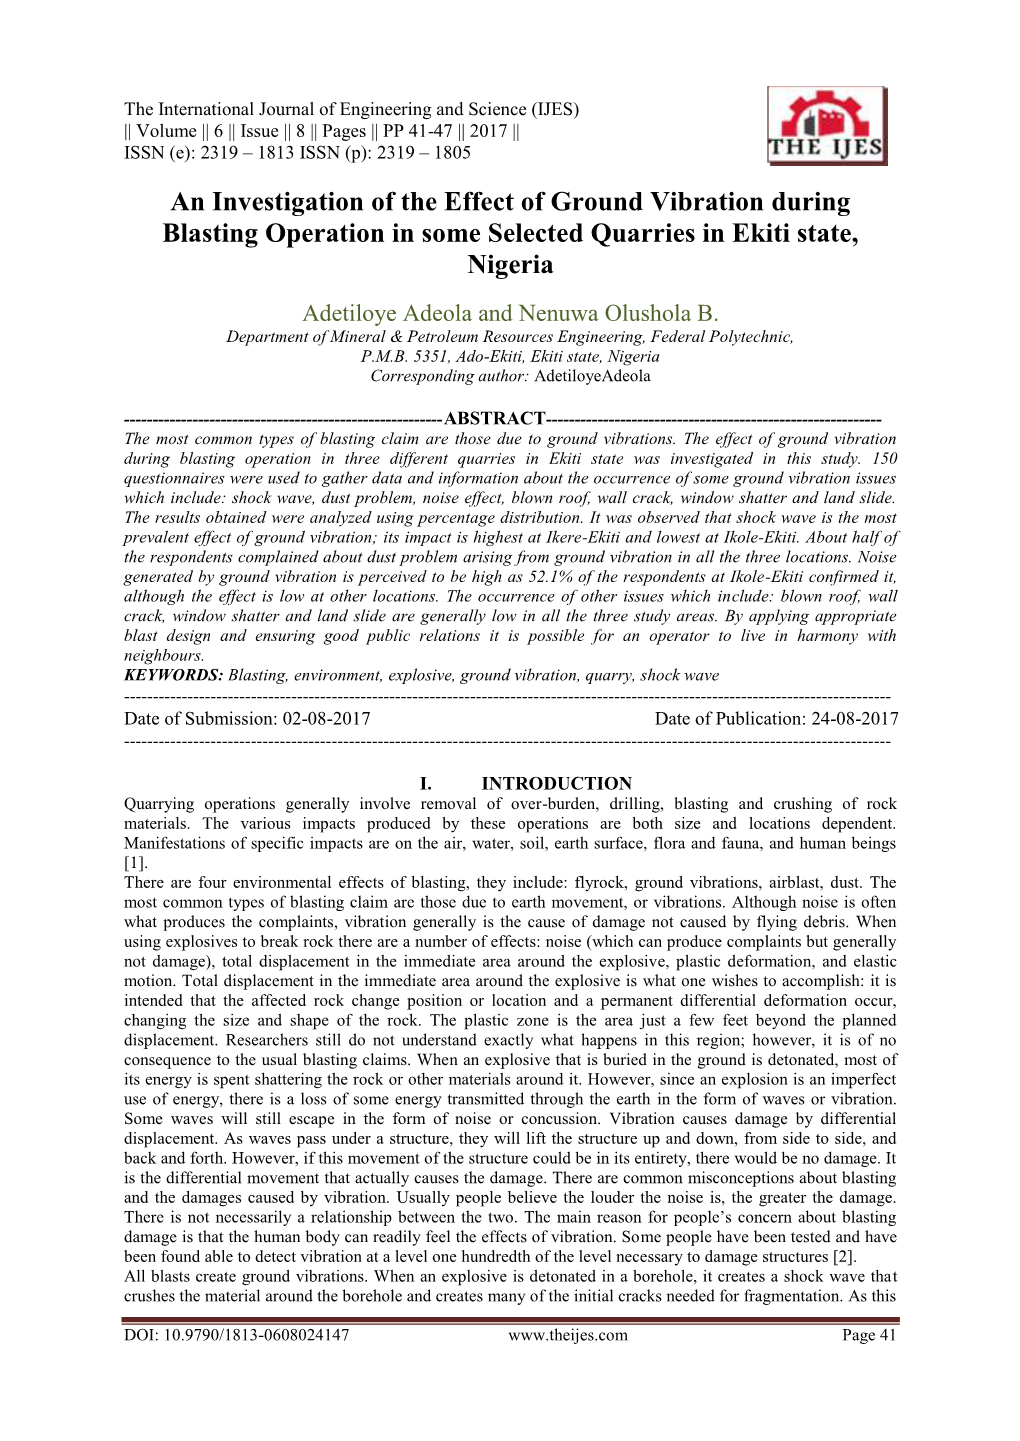 An Investigation of the Effect of Ground Vibration During Blasting Operation in Some Selected Quarries in Ekiti State, Nigeria